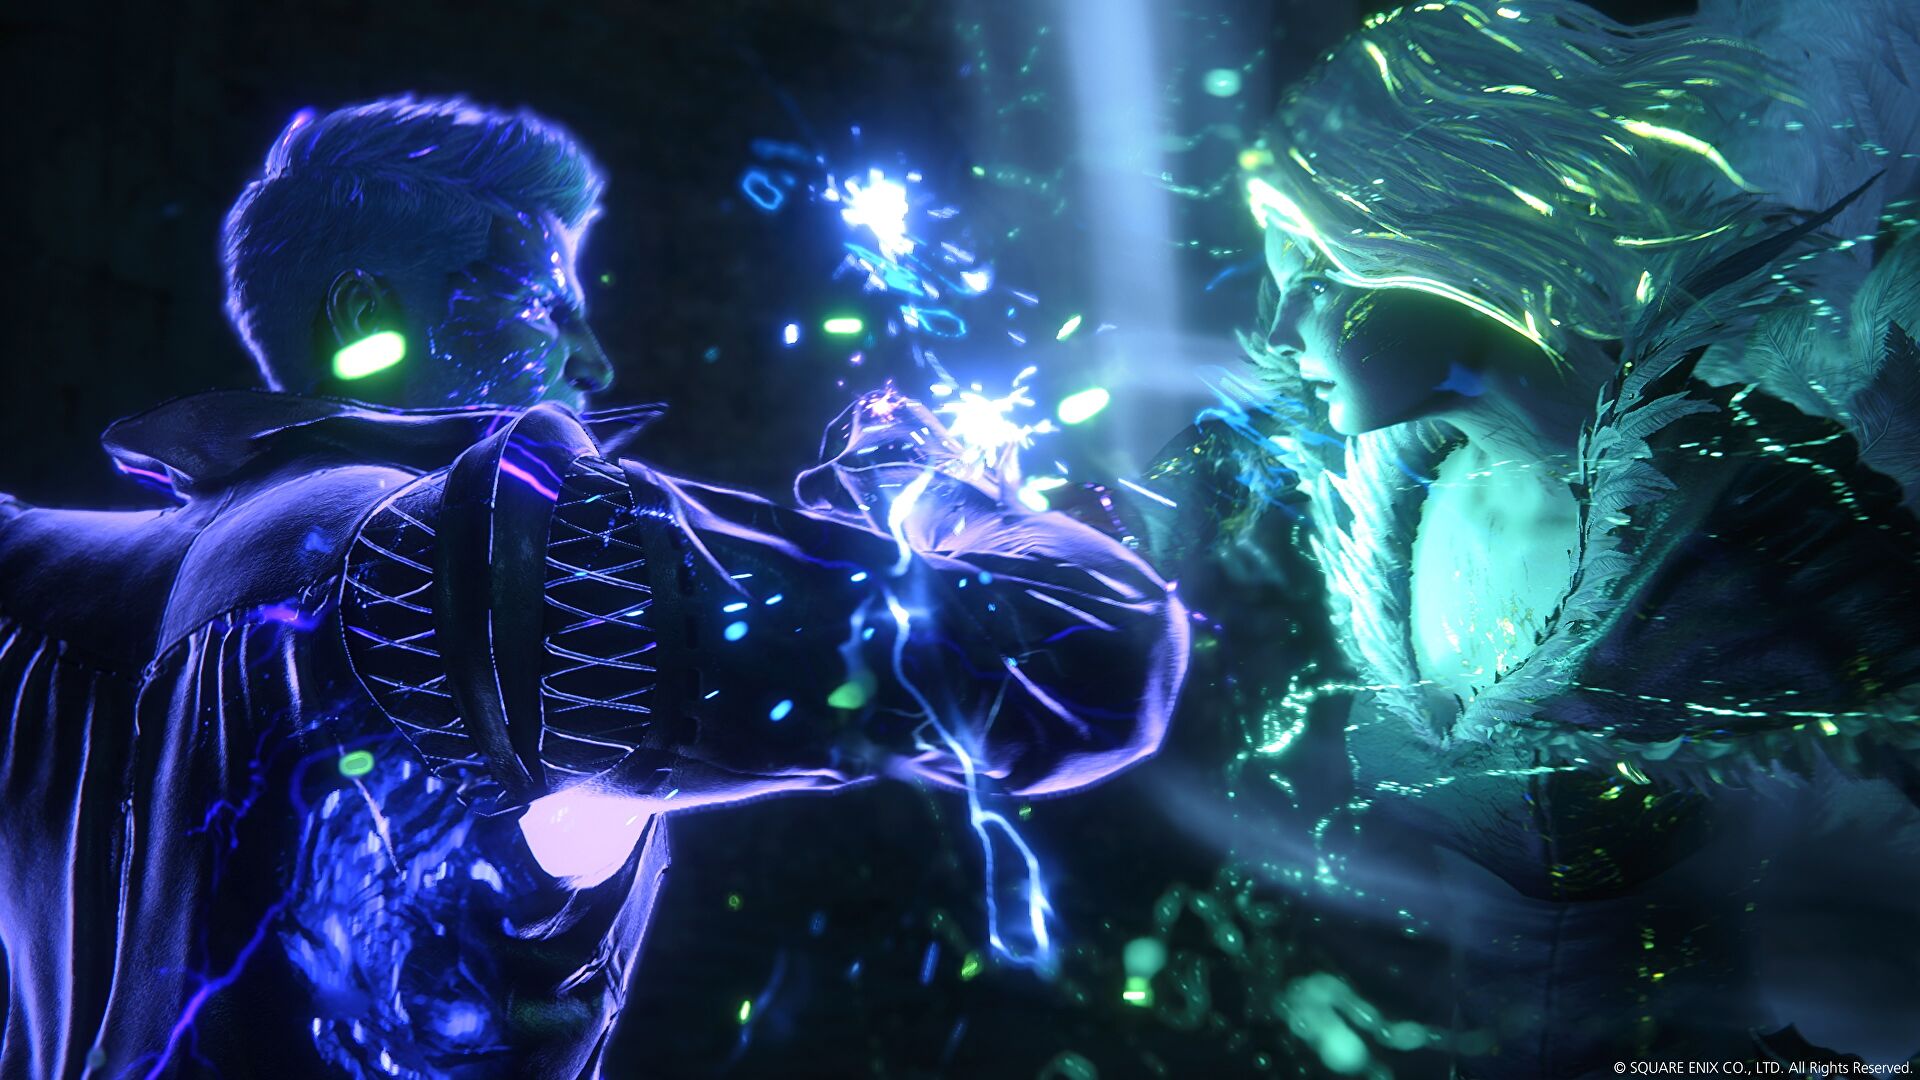 Final Fantasy 16’s bombastic new trailer is all about its Eikon summons